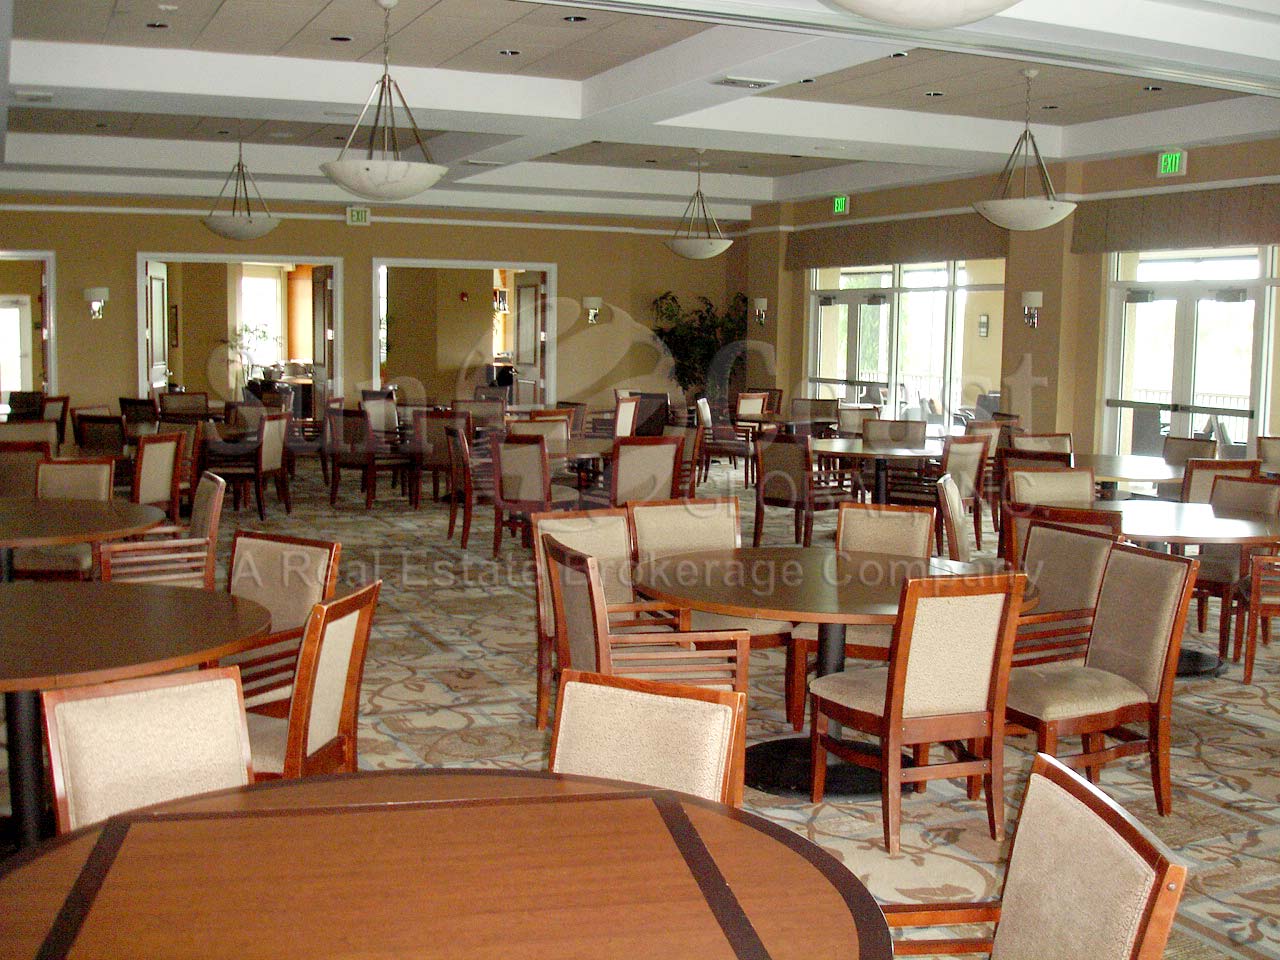 WINDSTAR Country Club dining